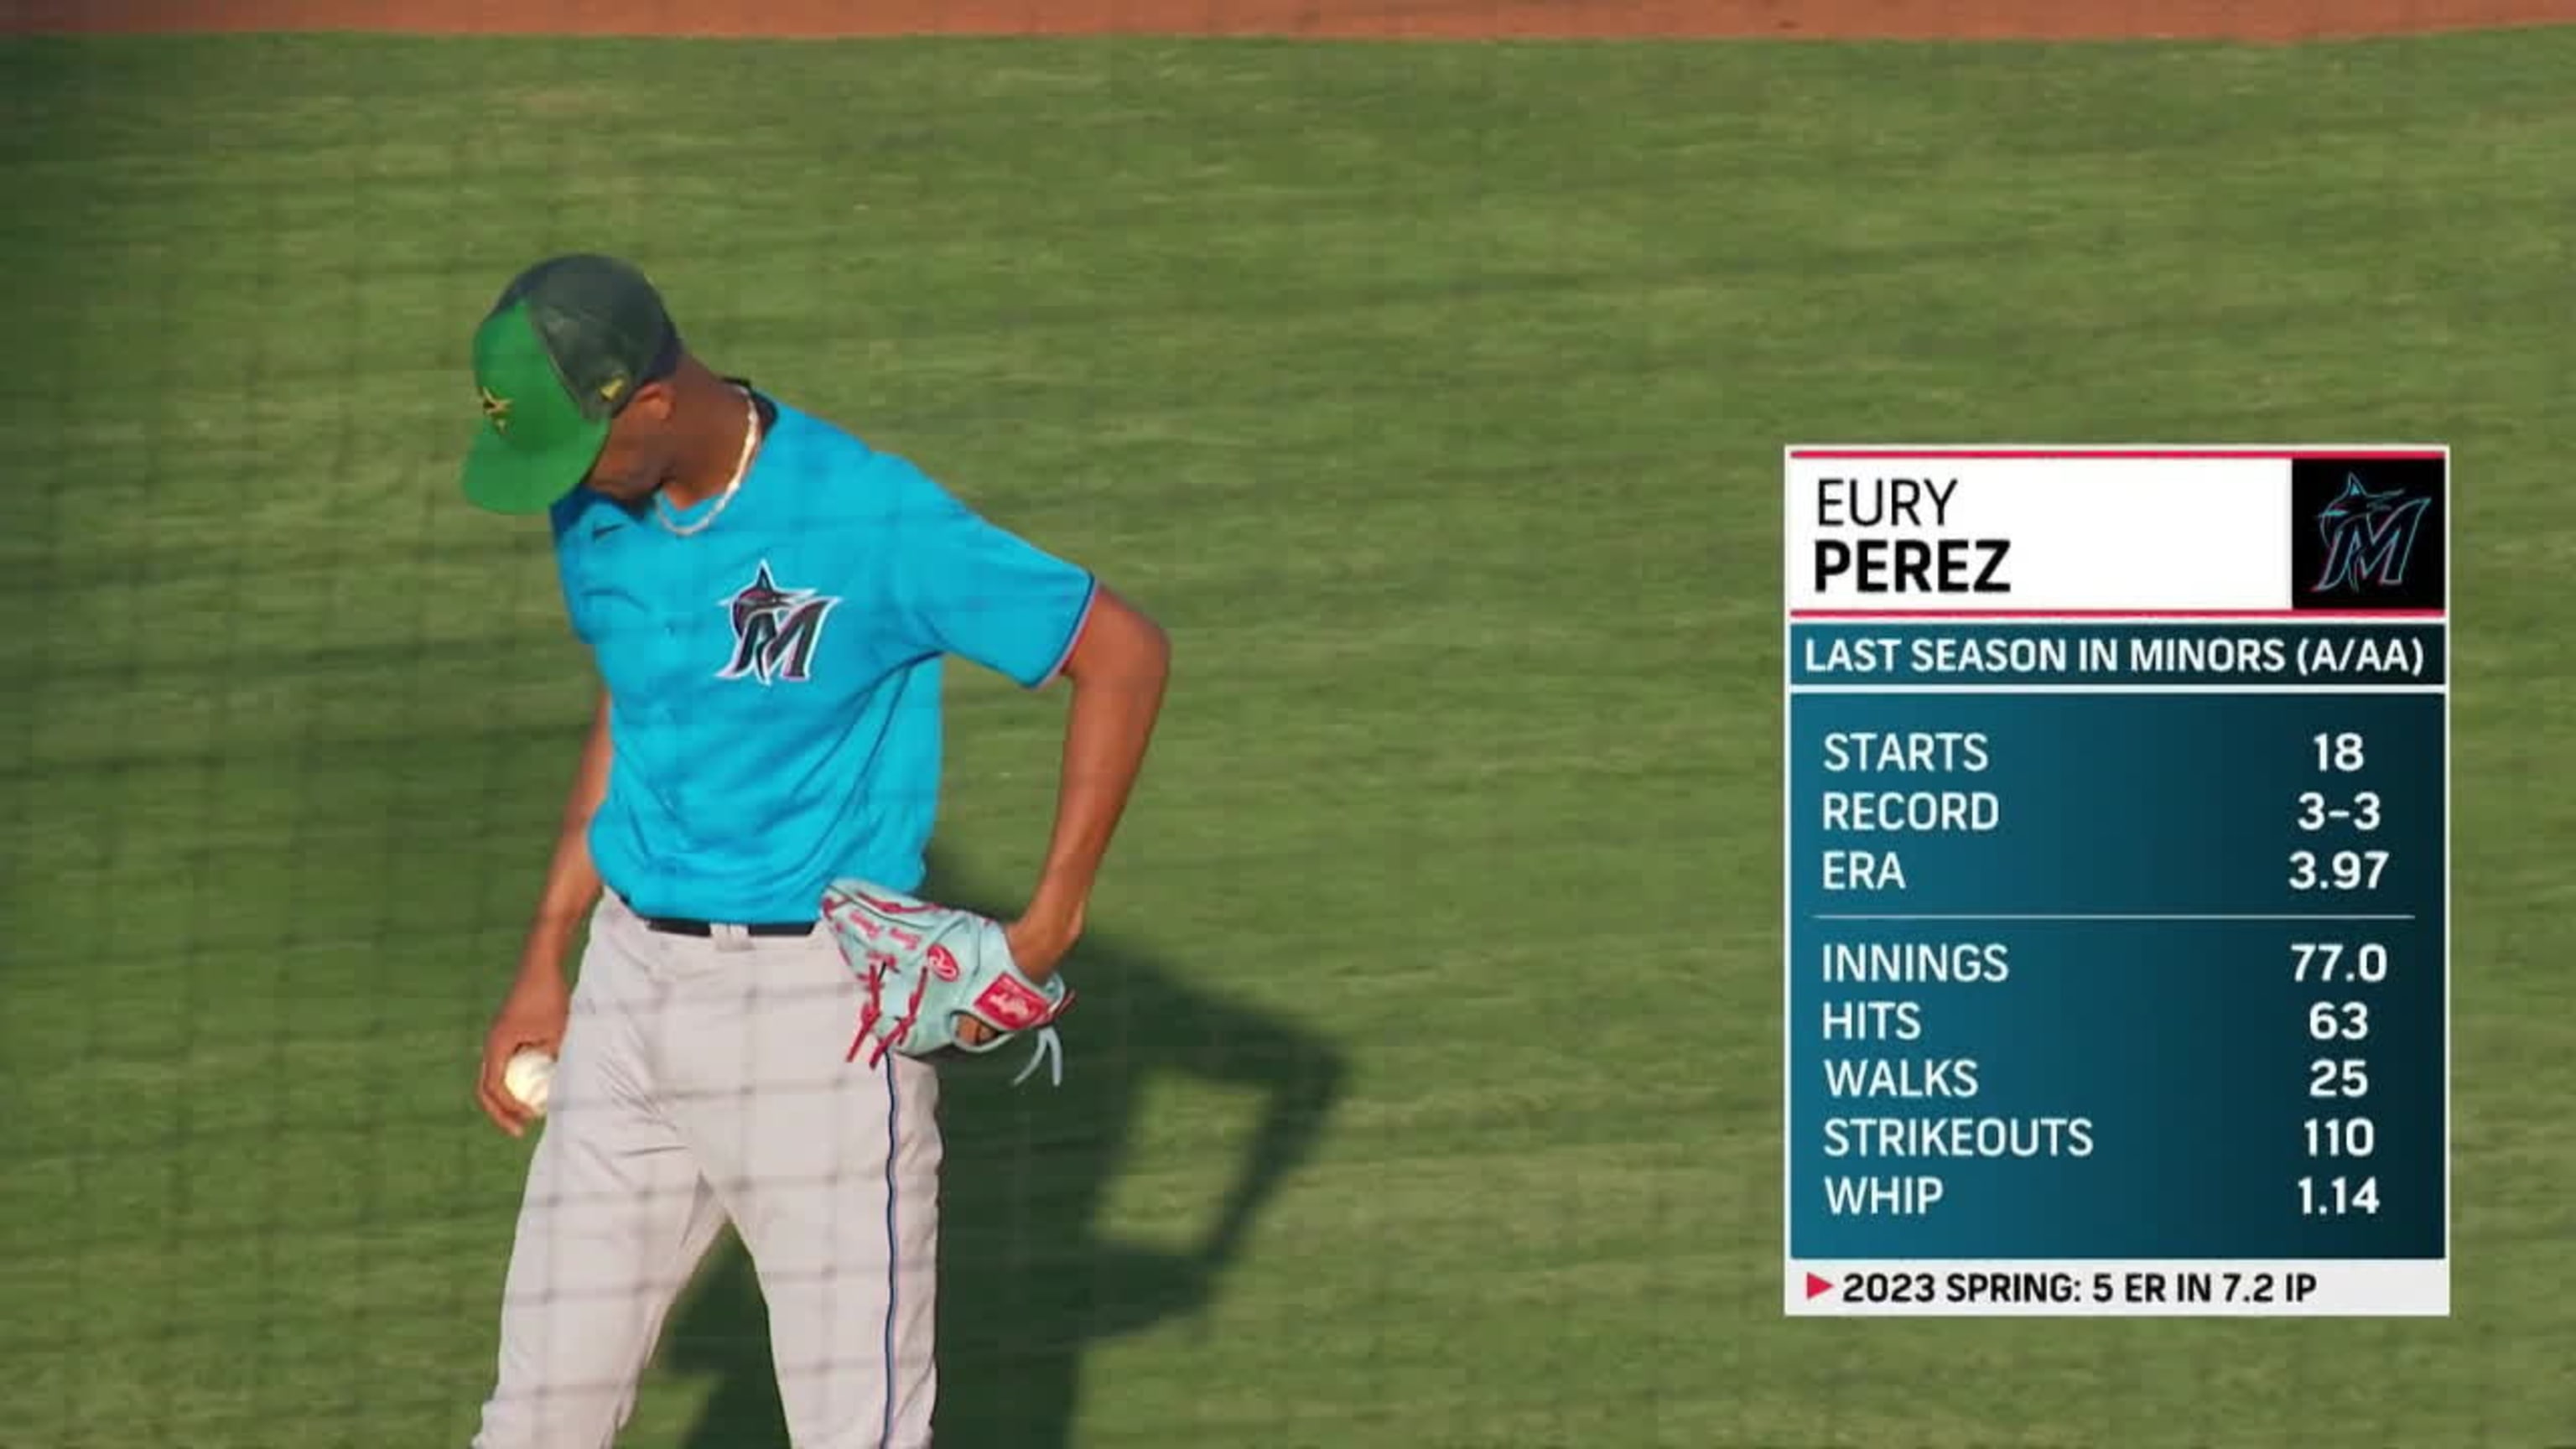 Marlins prospect Eury Pérez to debut Friday as club's youngest pitcher ever